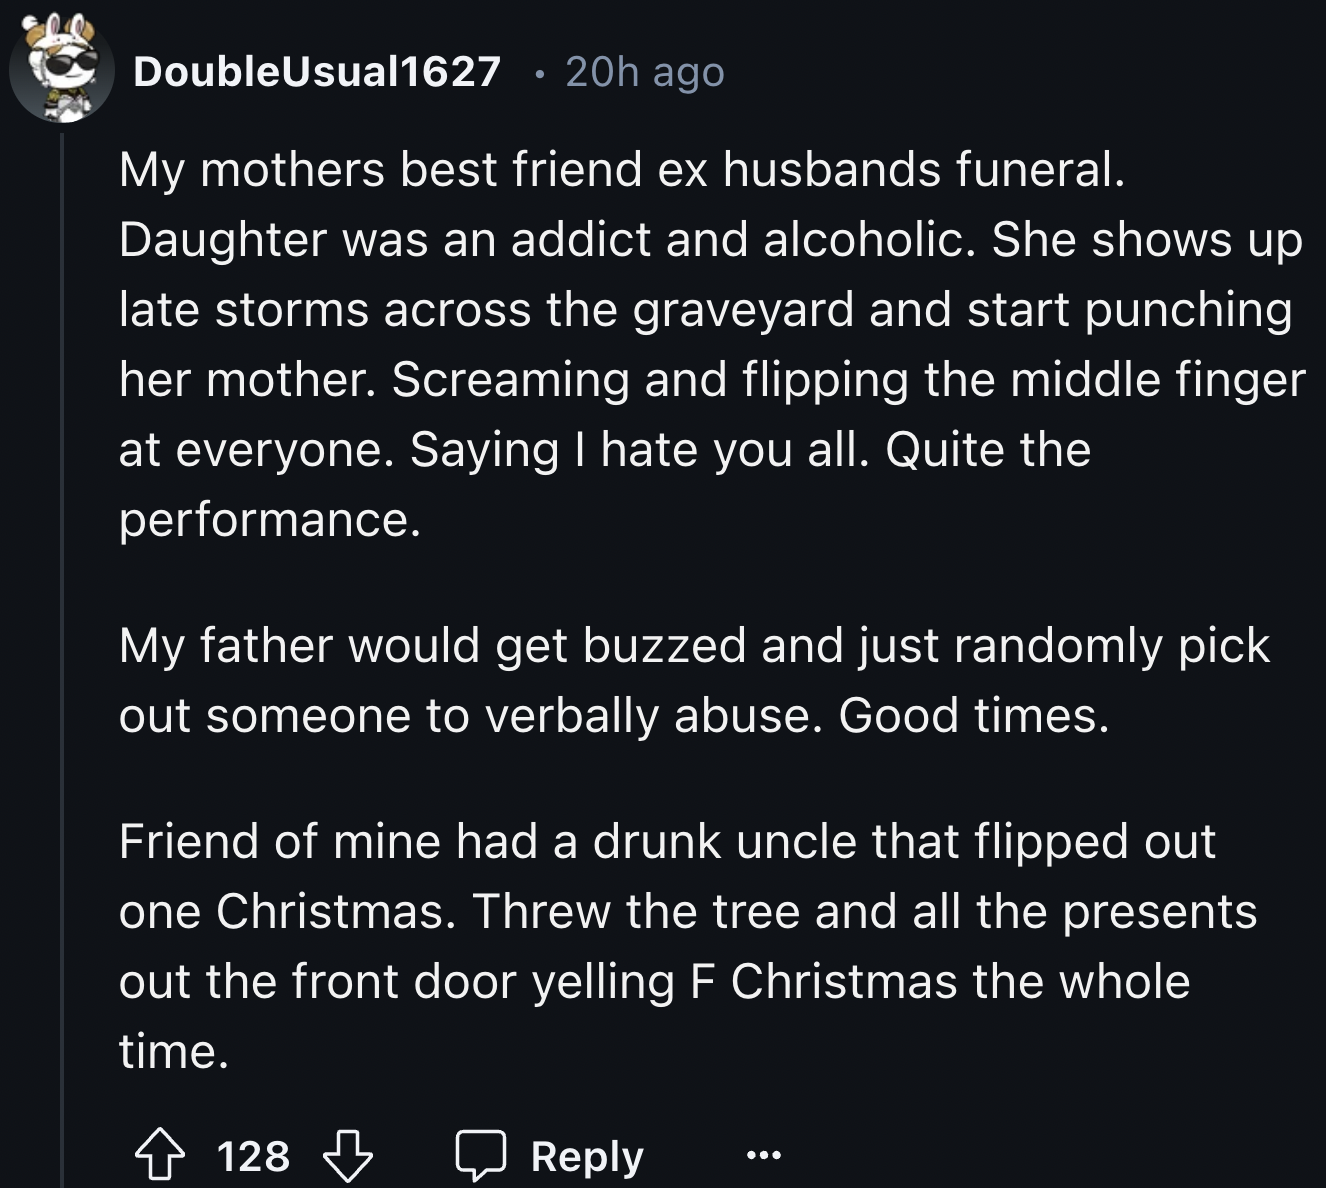 screenshot - DoubleUsual1627 20h ago My mothers best friend ex husbands funeral. Daughter was an addict and alcoholic. She shows up late storms across the graveyard and start punching her mother. Screaming and flipping the middle finger at everyone. Sayin